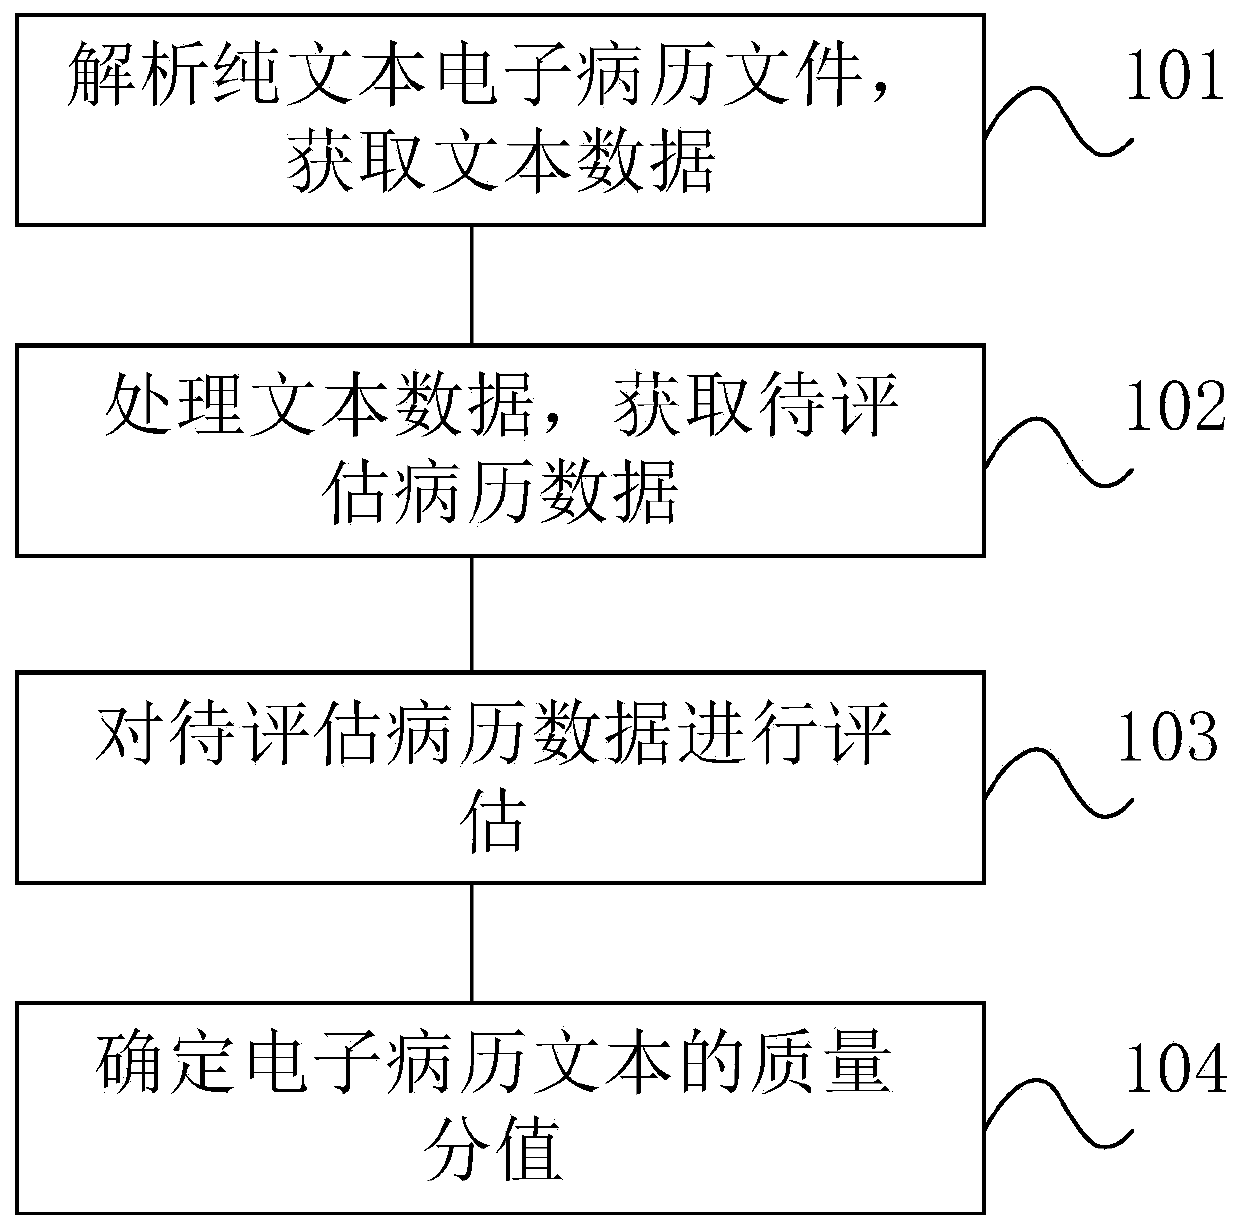 Evaluation method and equipment for electronic medical record text